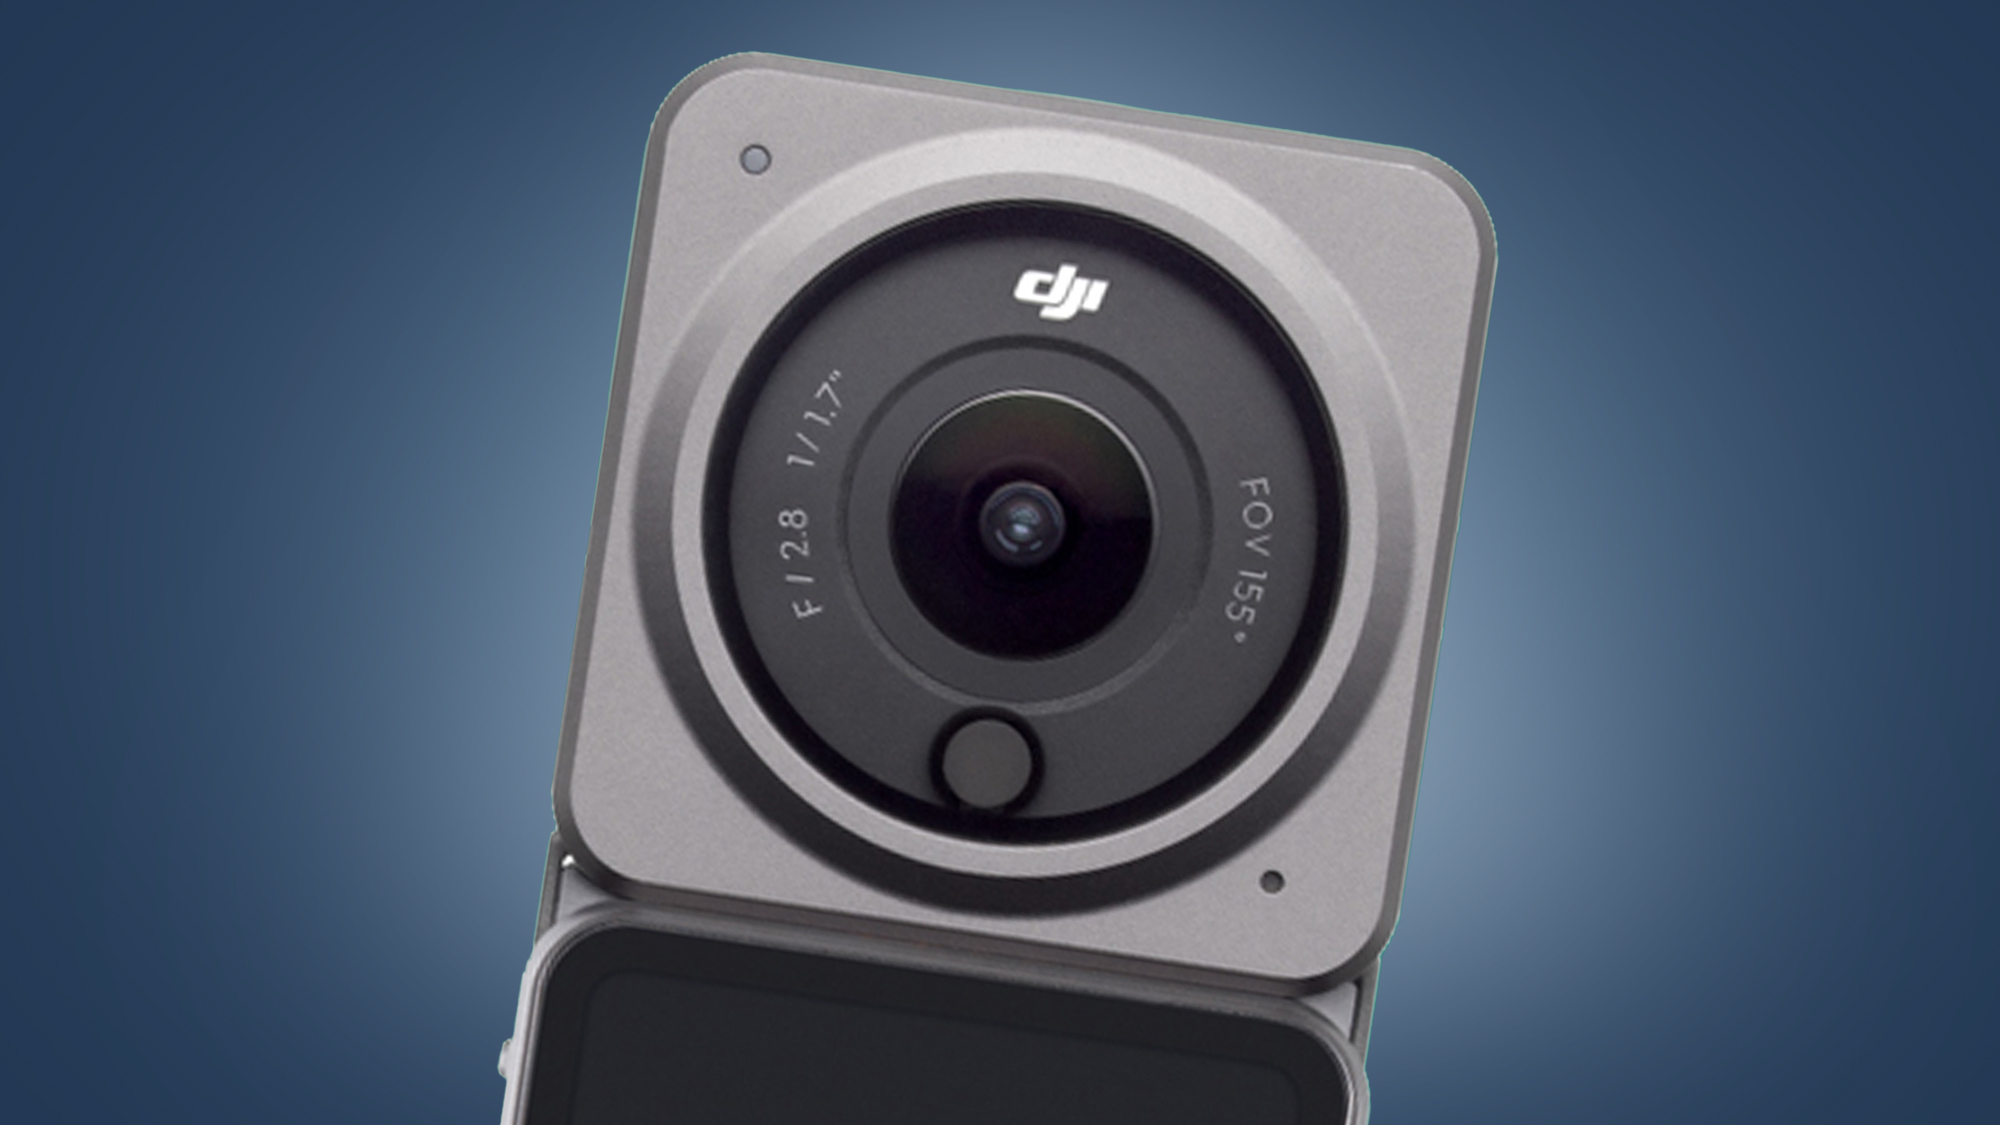 The DJI Action 2 action cam on a blue background